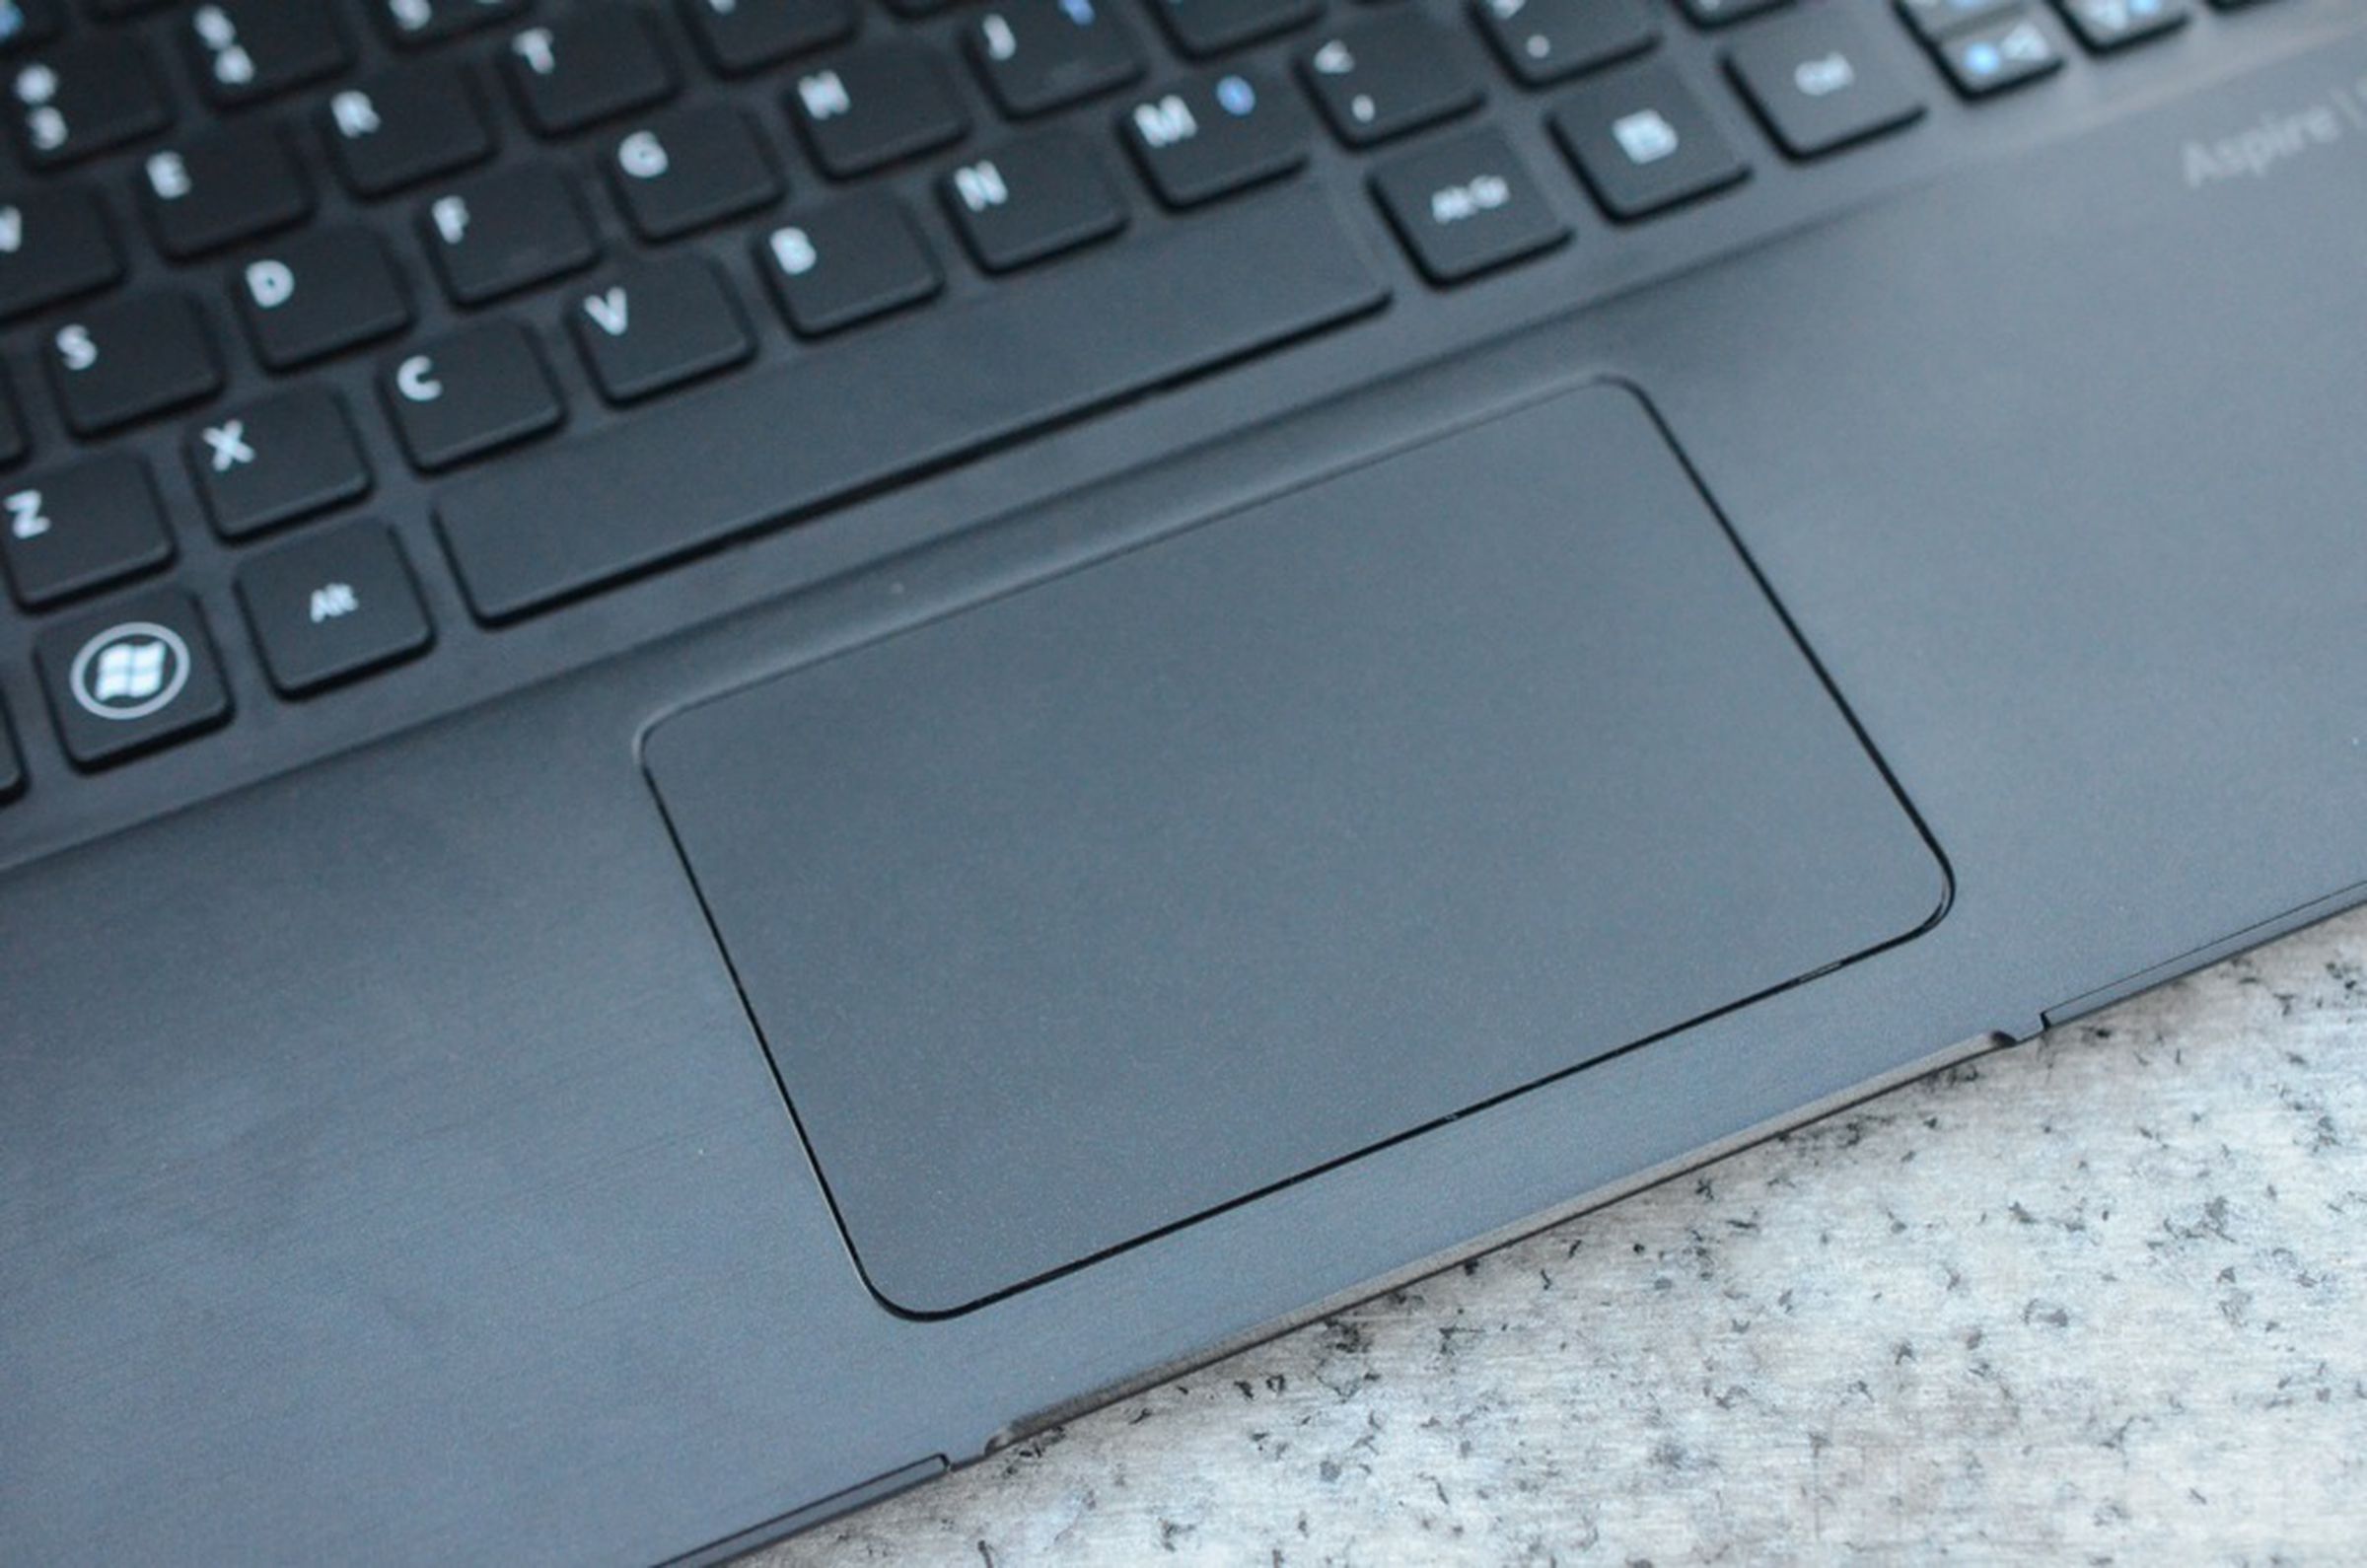 Acer Aspire S5 review pictures